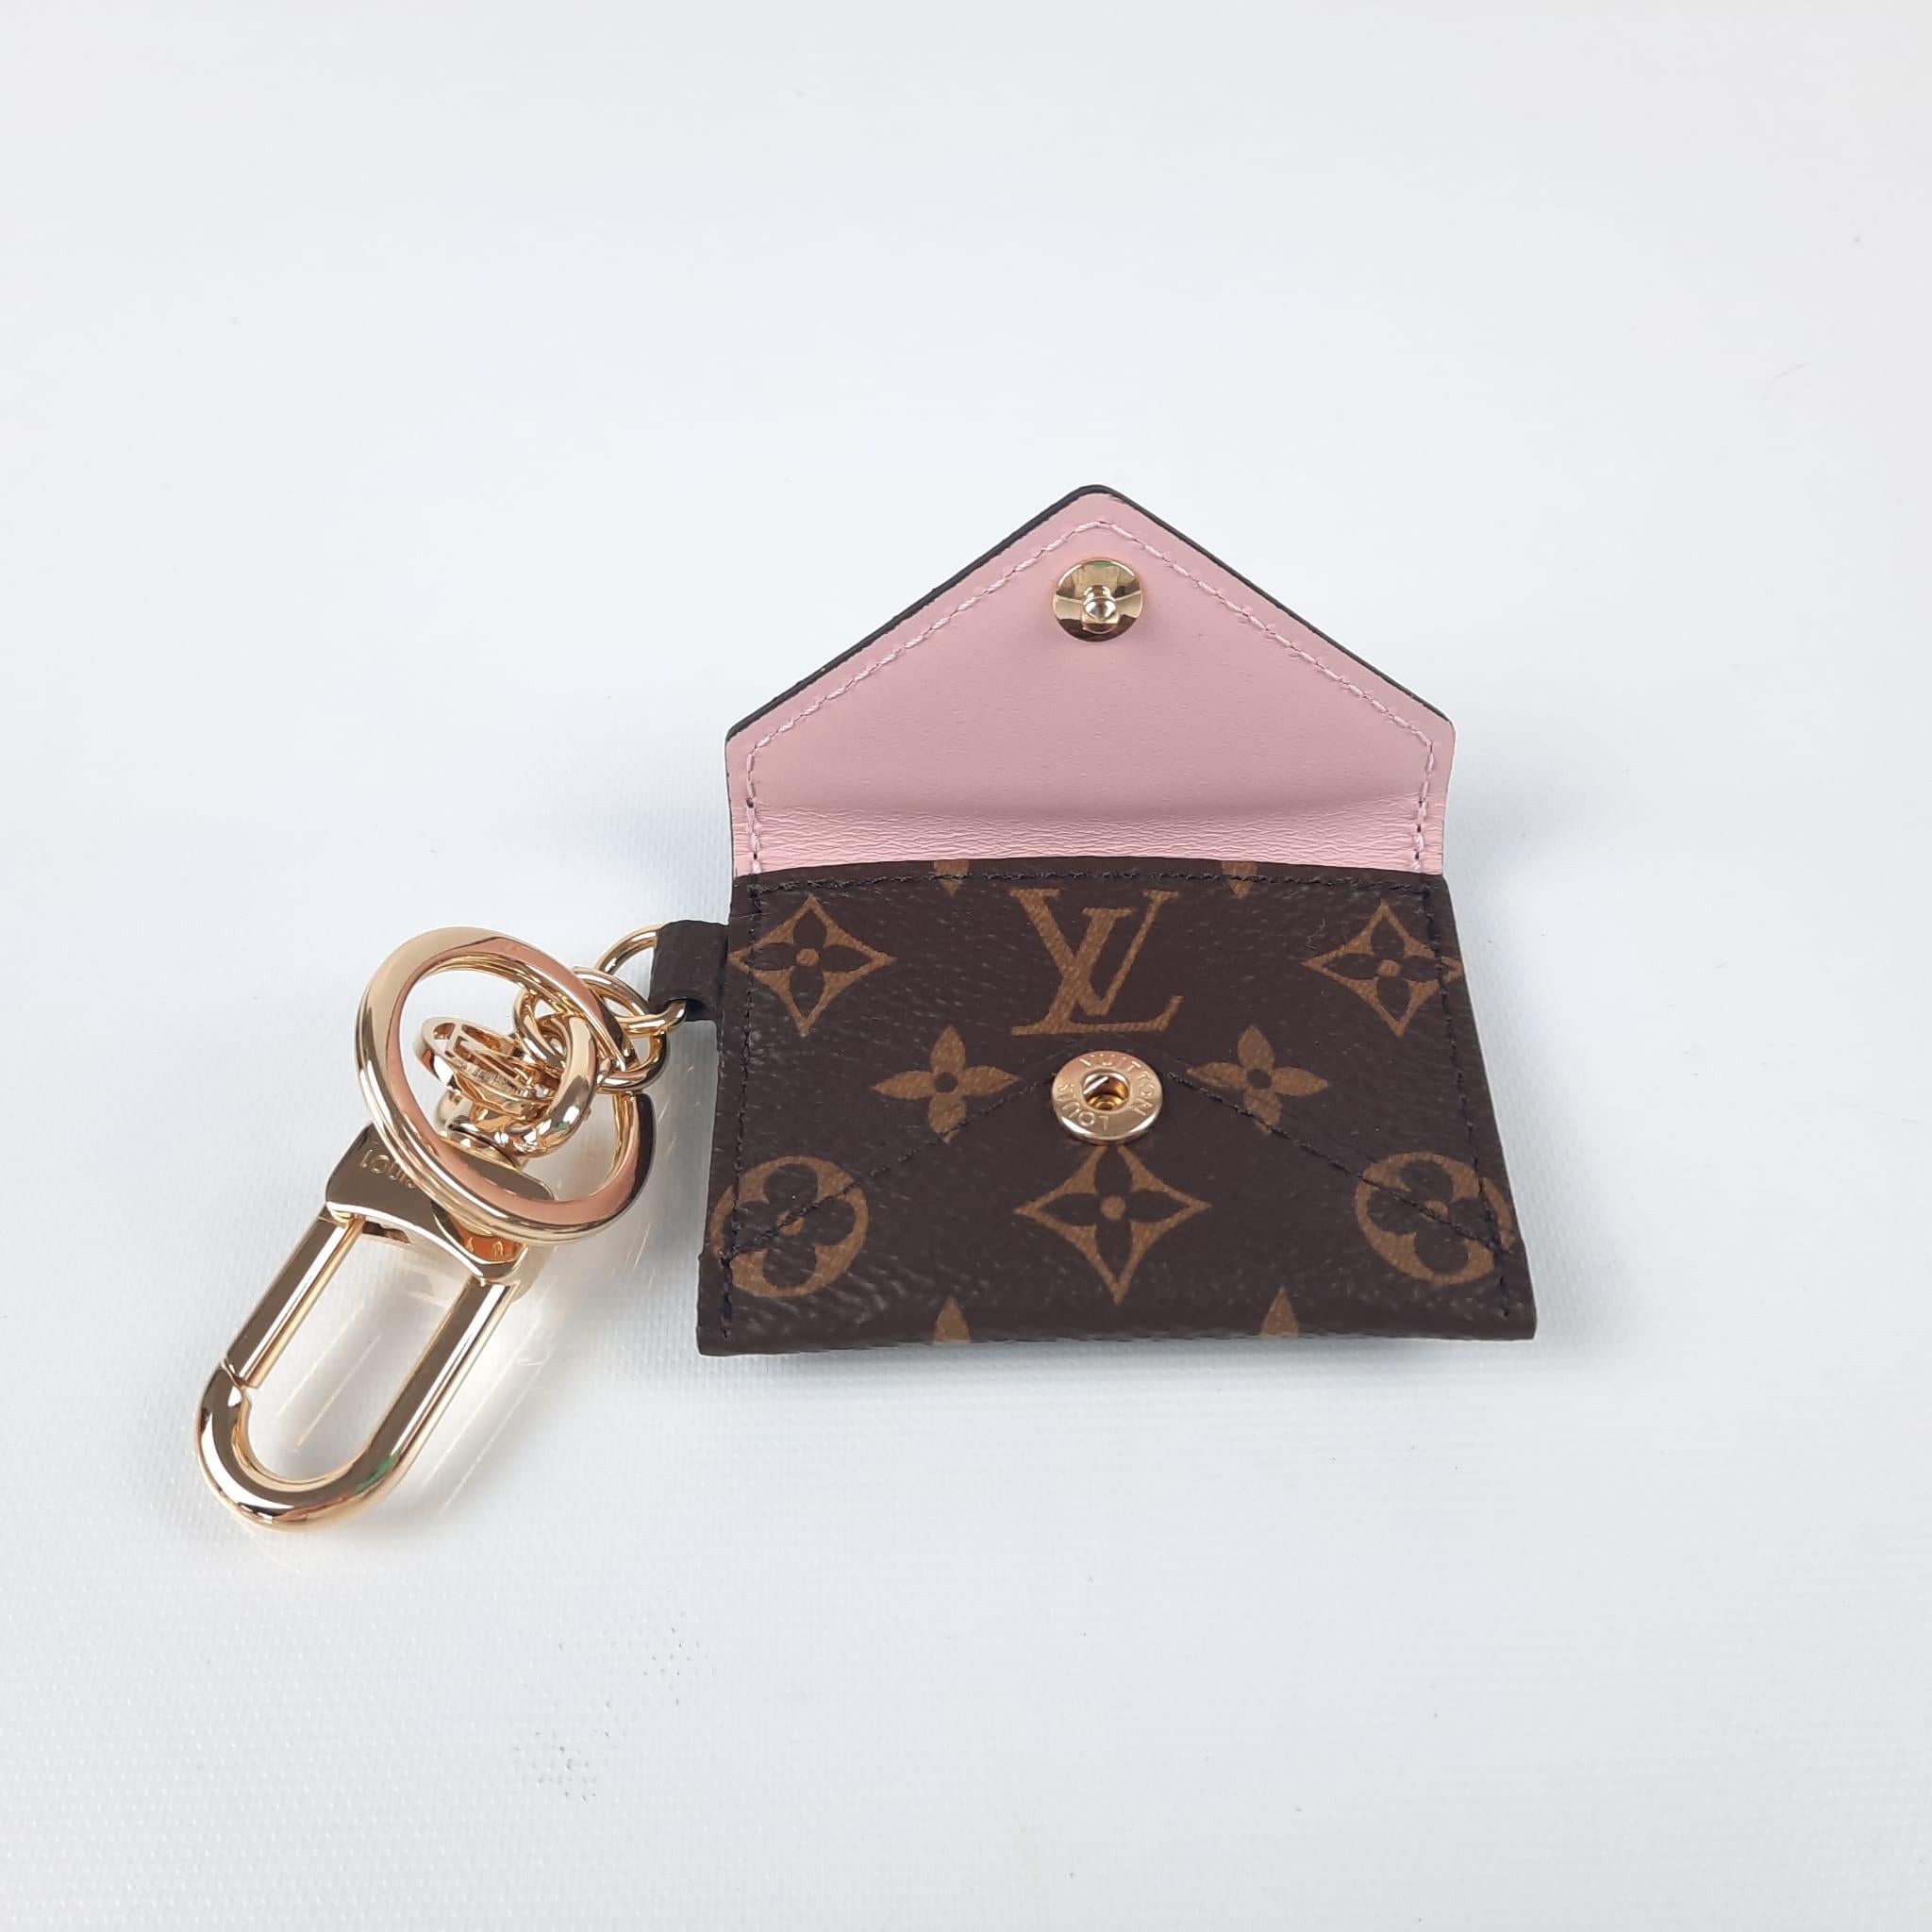 Louis Vuitton Bag charm and Kirigami pouch key ring monogram For Sale 2